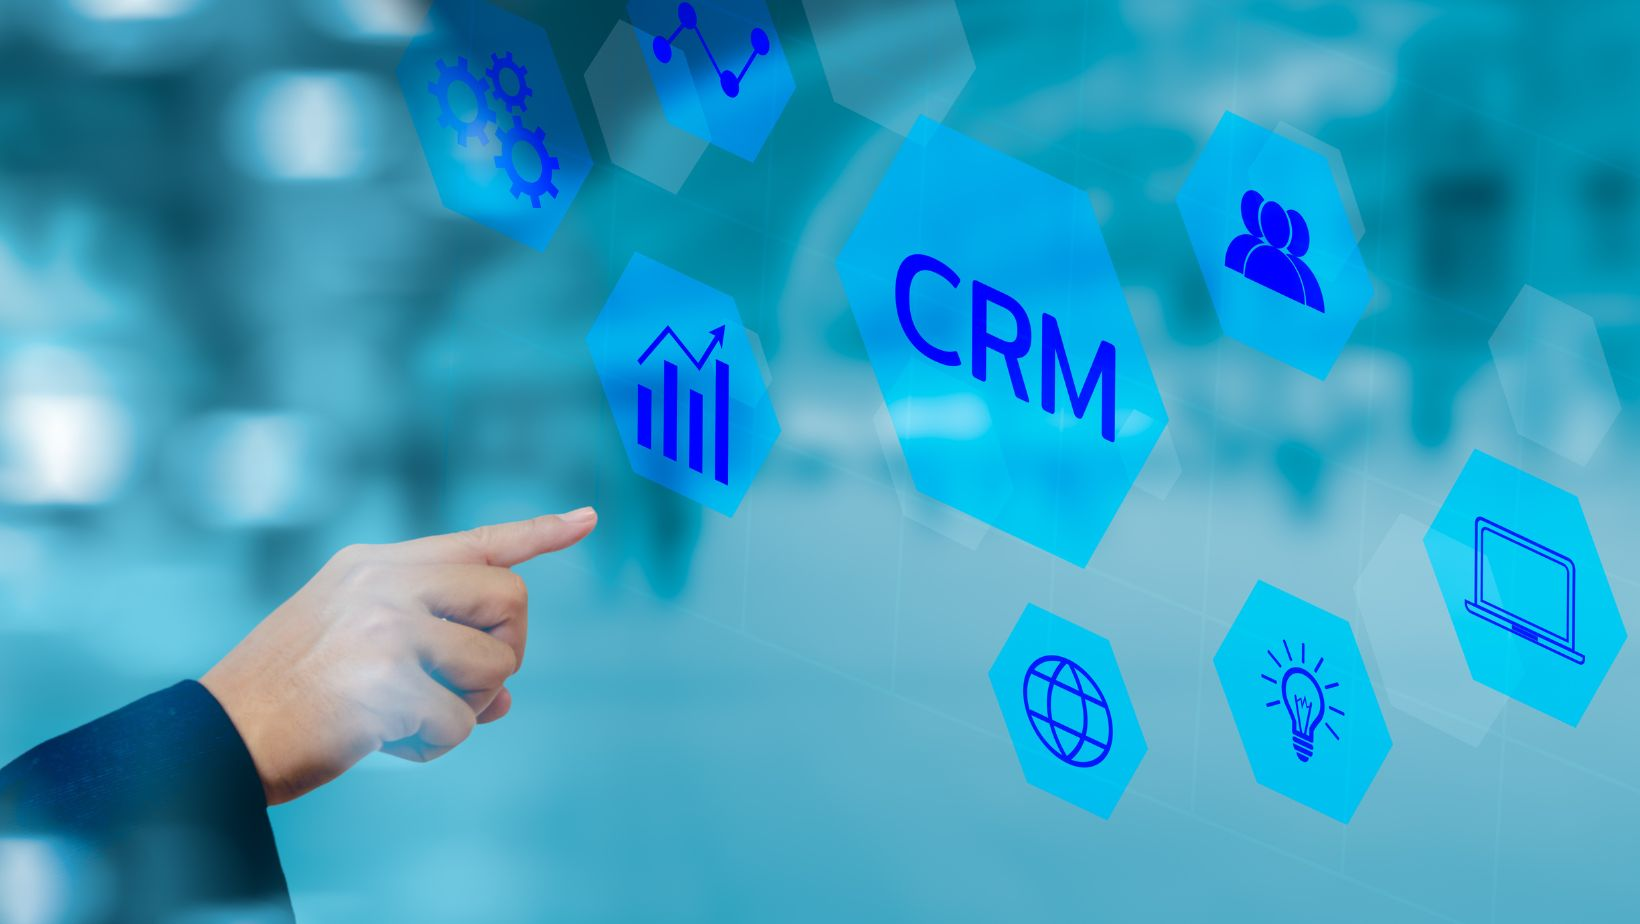 Things to avoid doing with a CRM solution